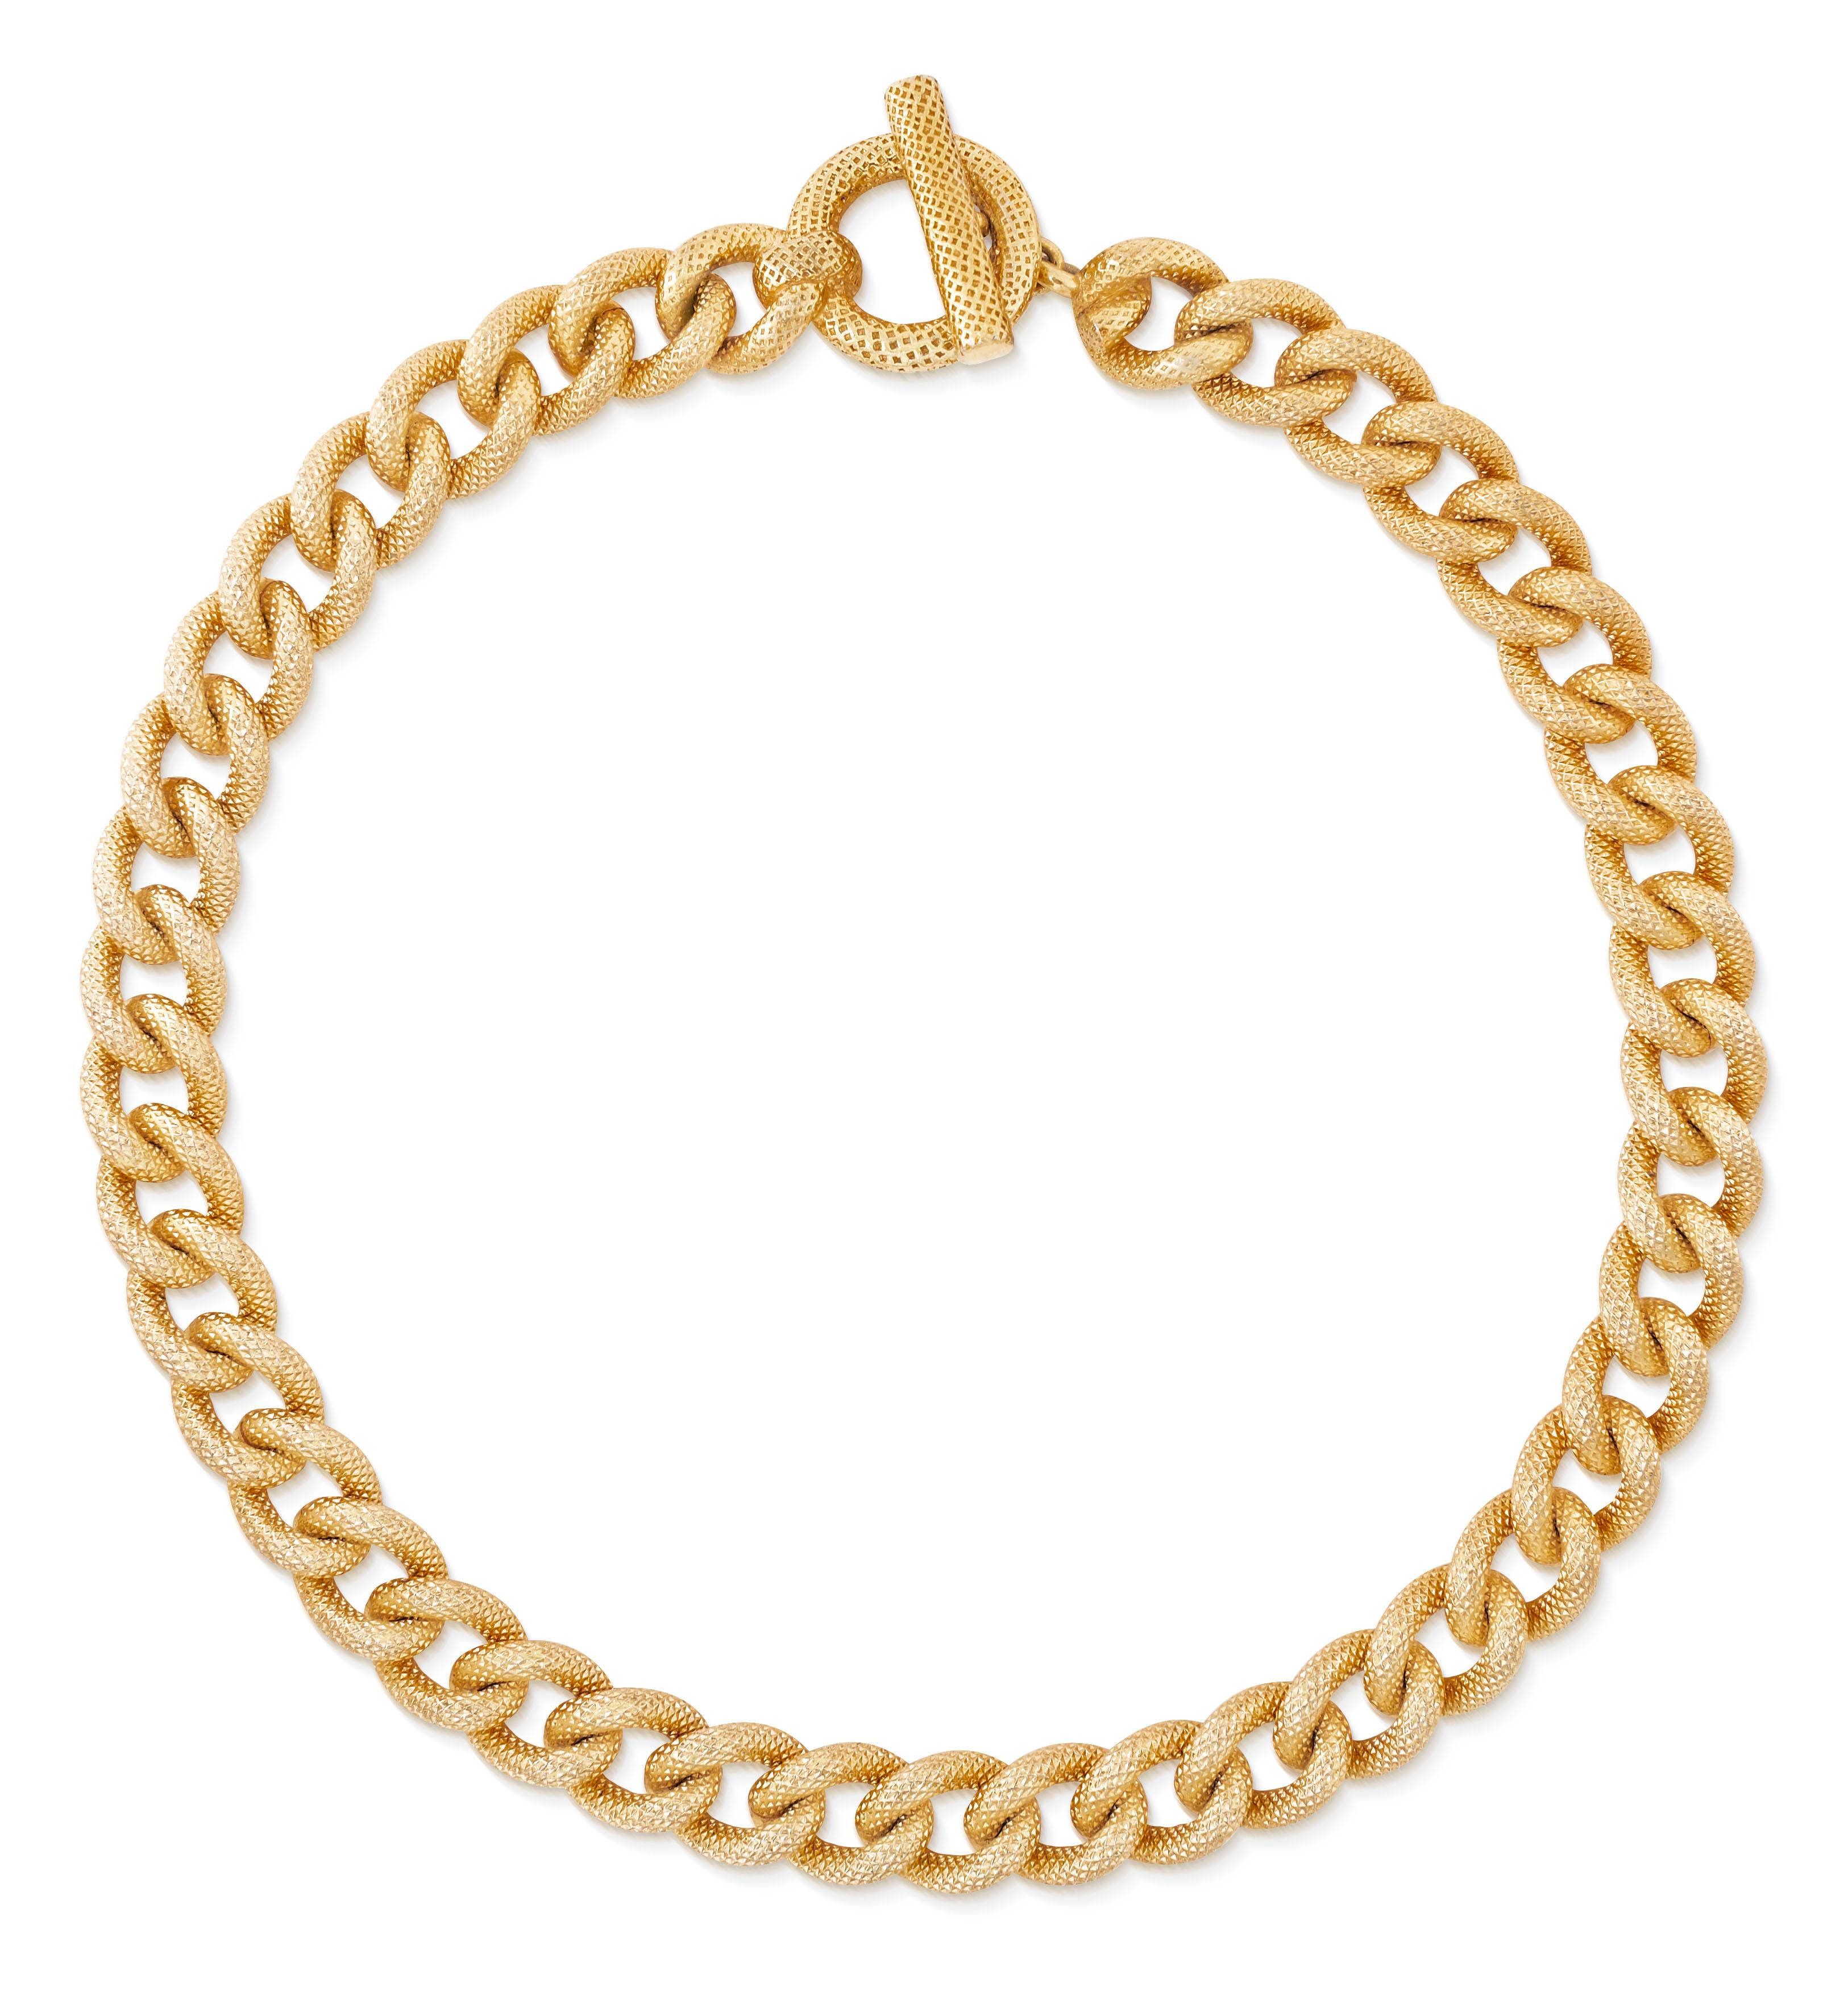 Vintage 1980s Christian Dior textured curb chain necklace in gold plate.  This necklace features chunky links with a unique diamond-patterned texture which gives it a lustrous semi-matte finish.  Ring and toggle closure.

Length approximately 16